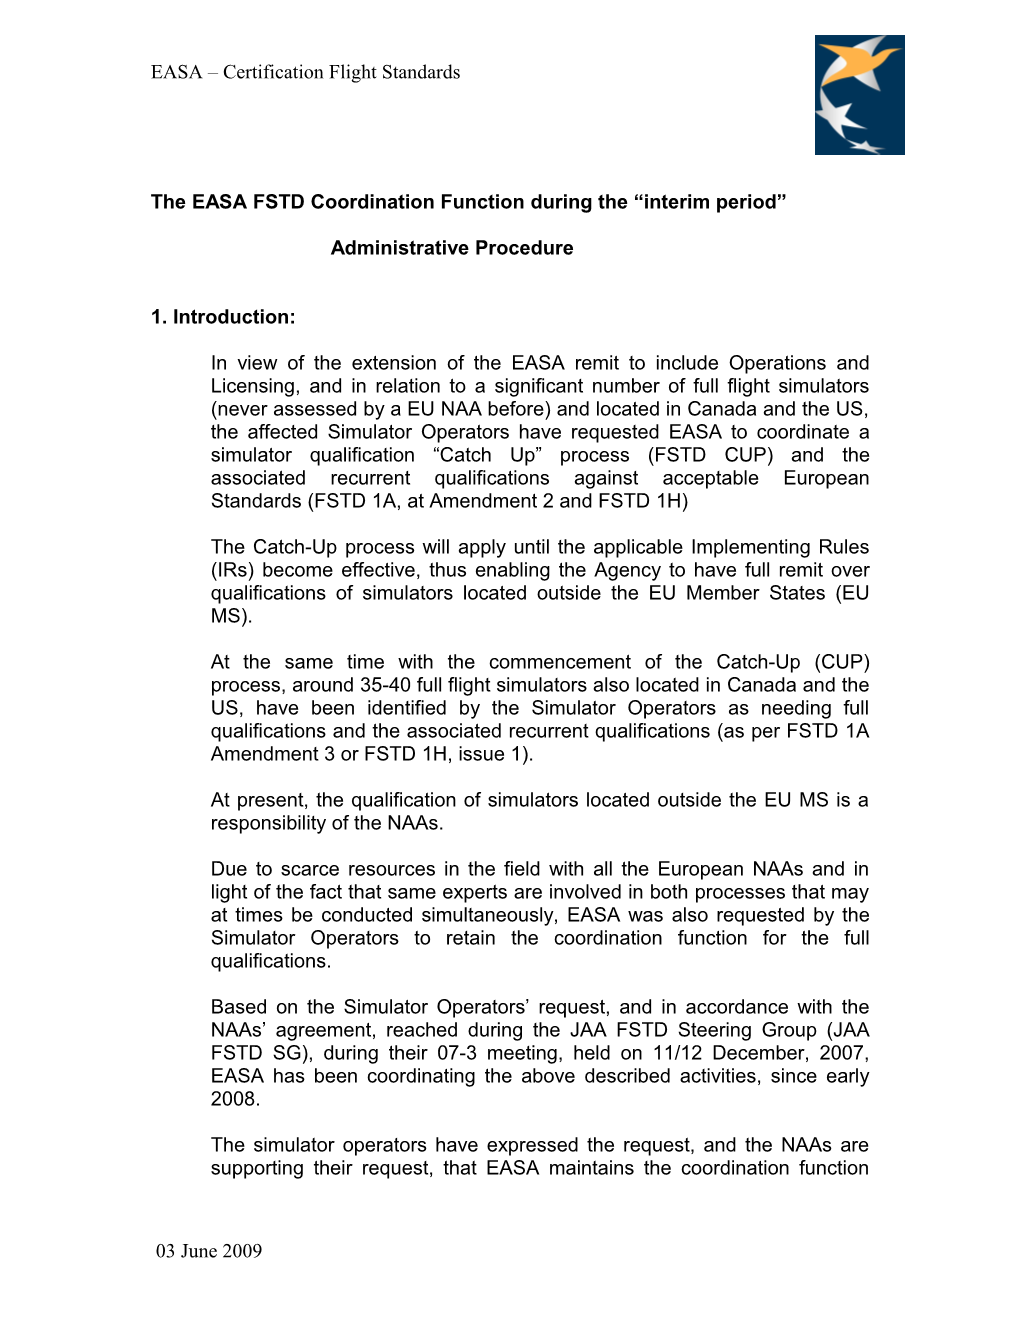 EASA FSTD Coordination Function During the Interim Period